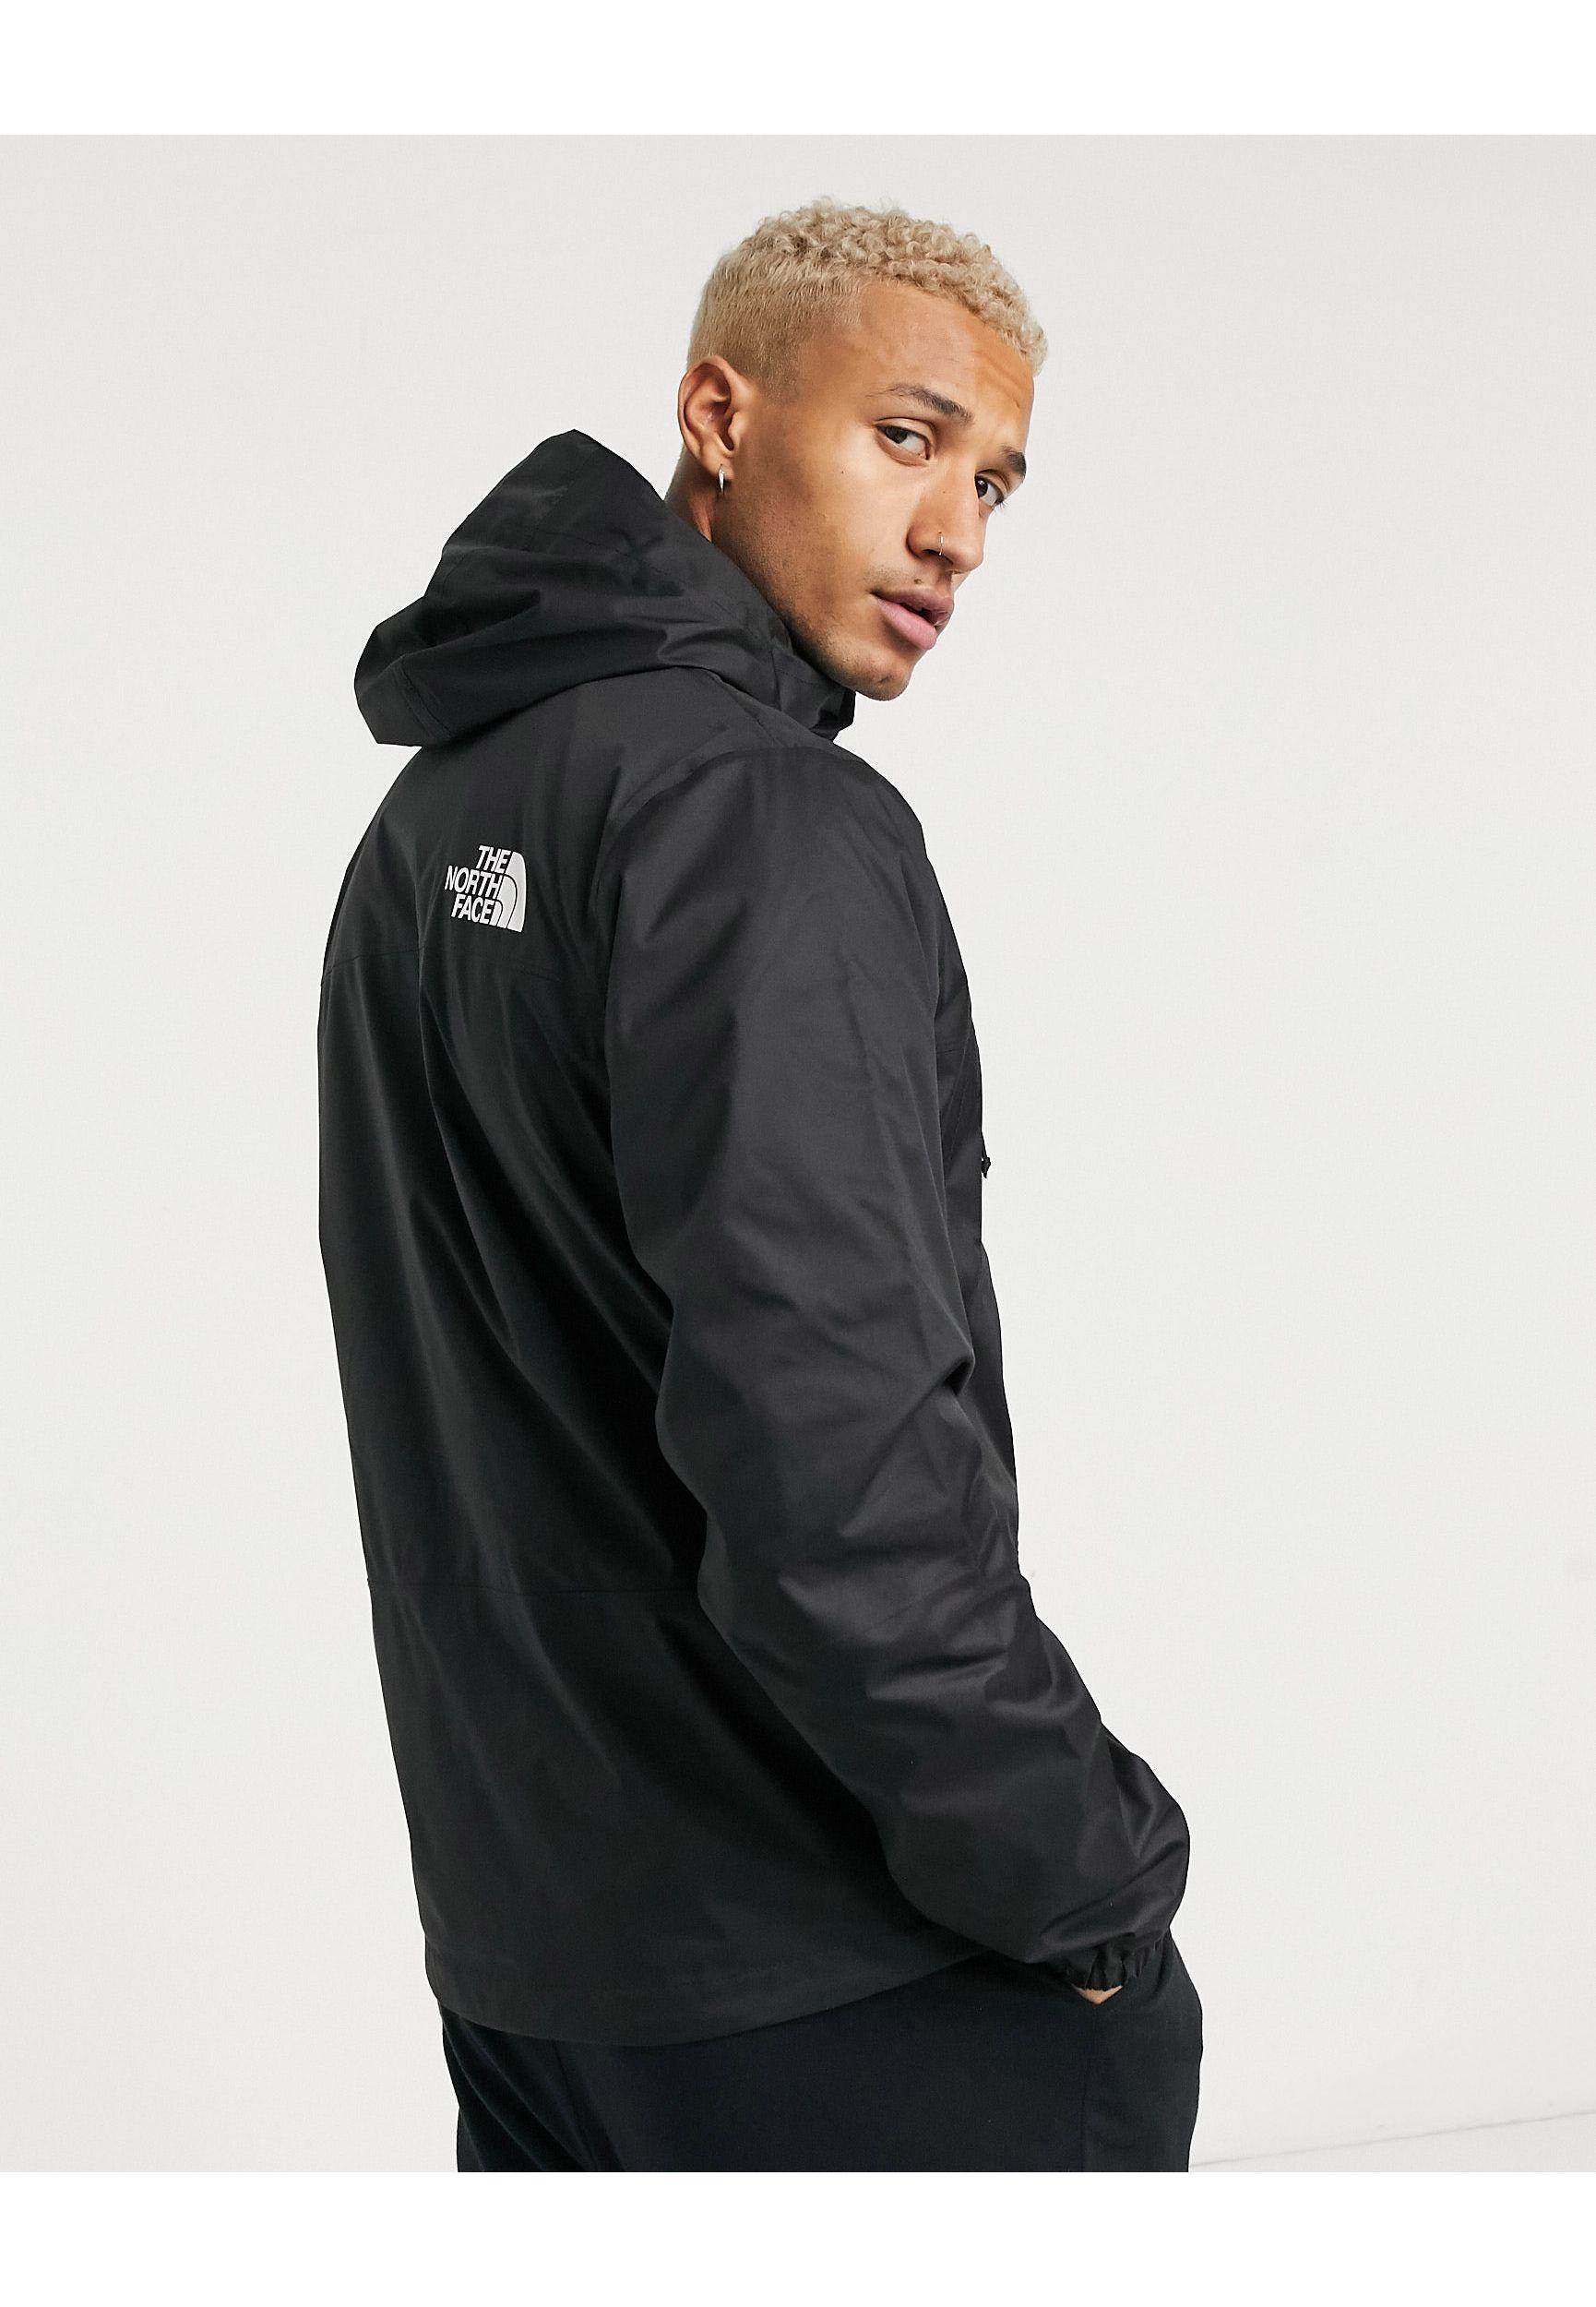 North Face 1990 Mountain Q Jacket Black on Sale, 57% OFF |  www.accede-web.com